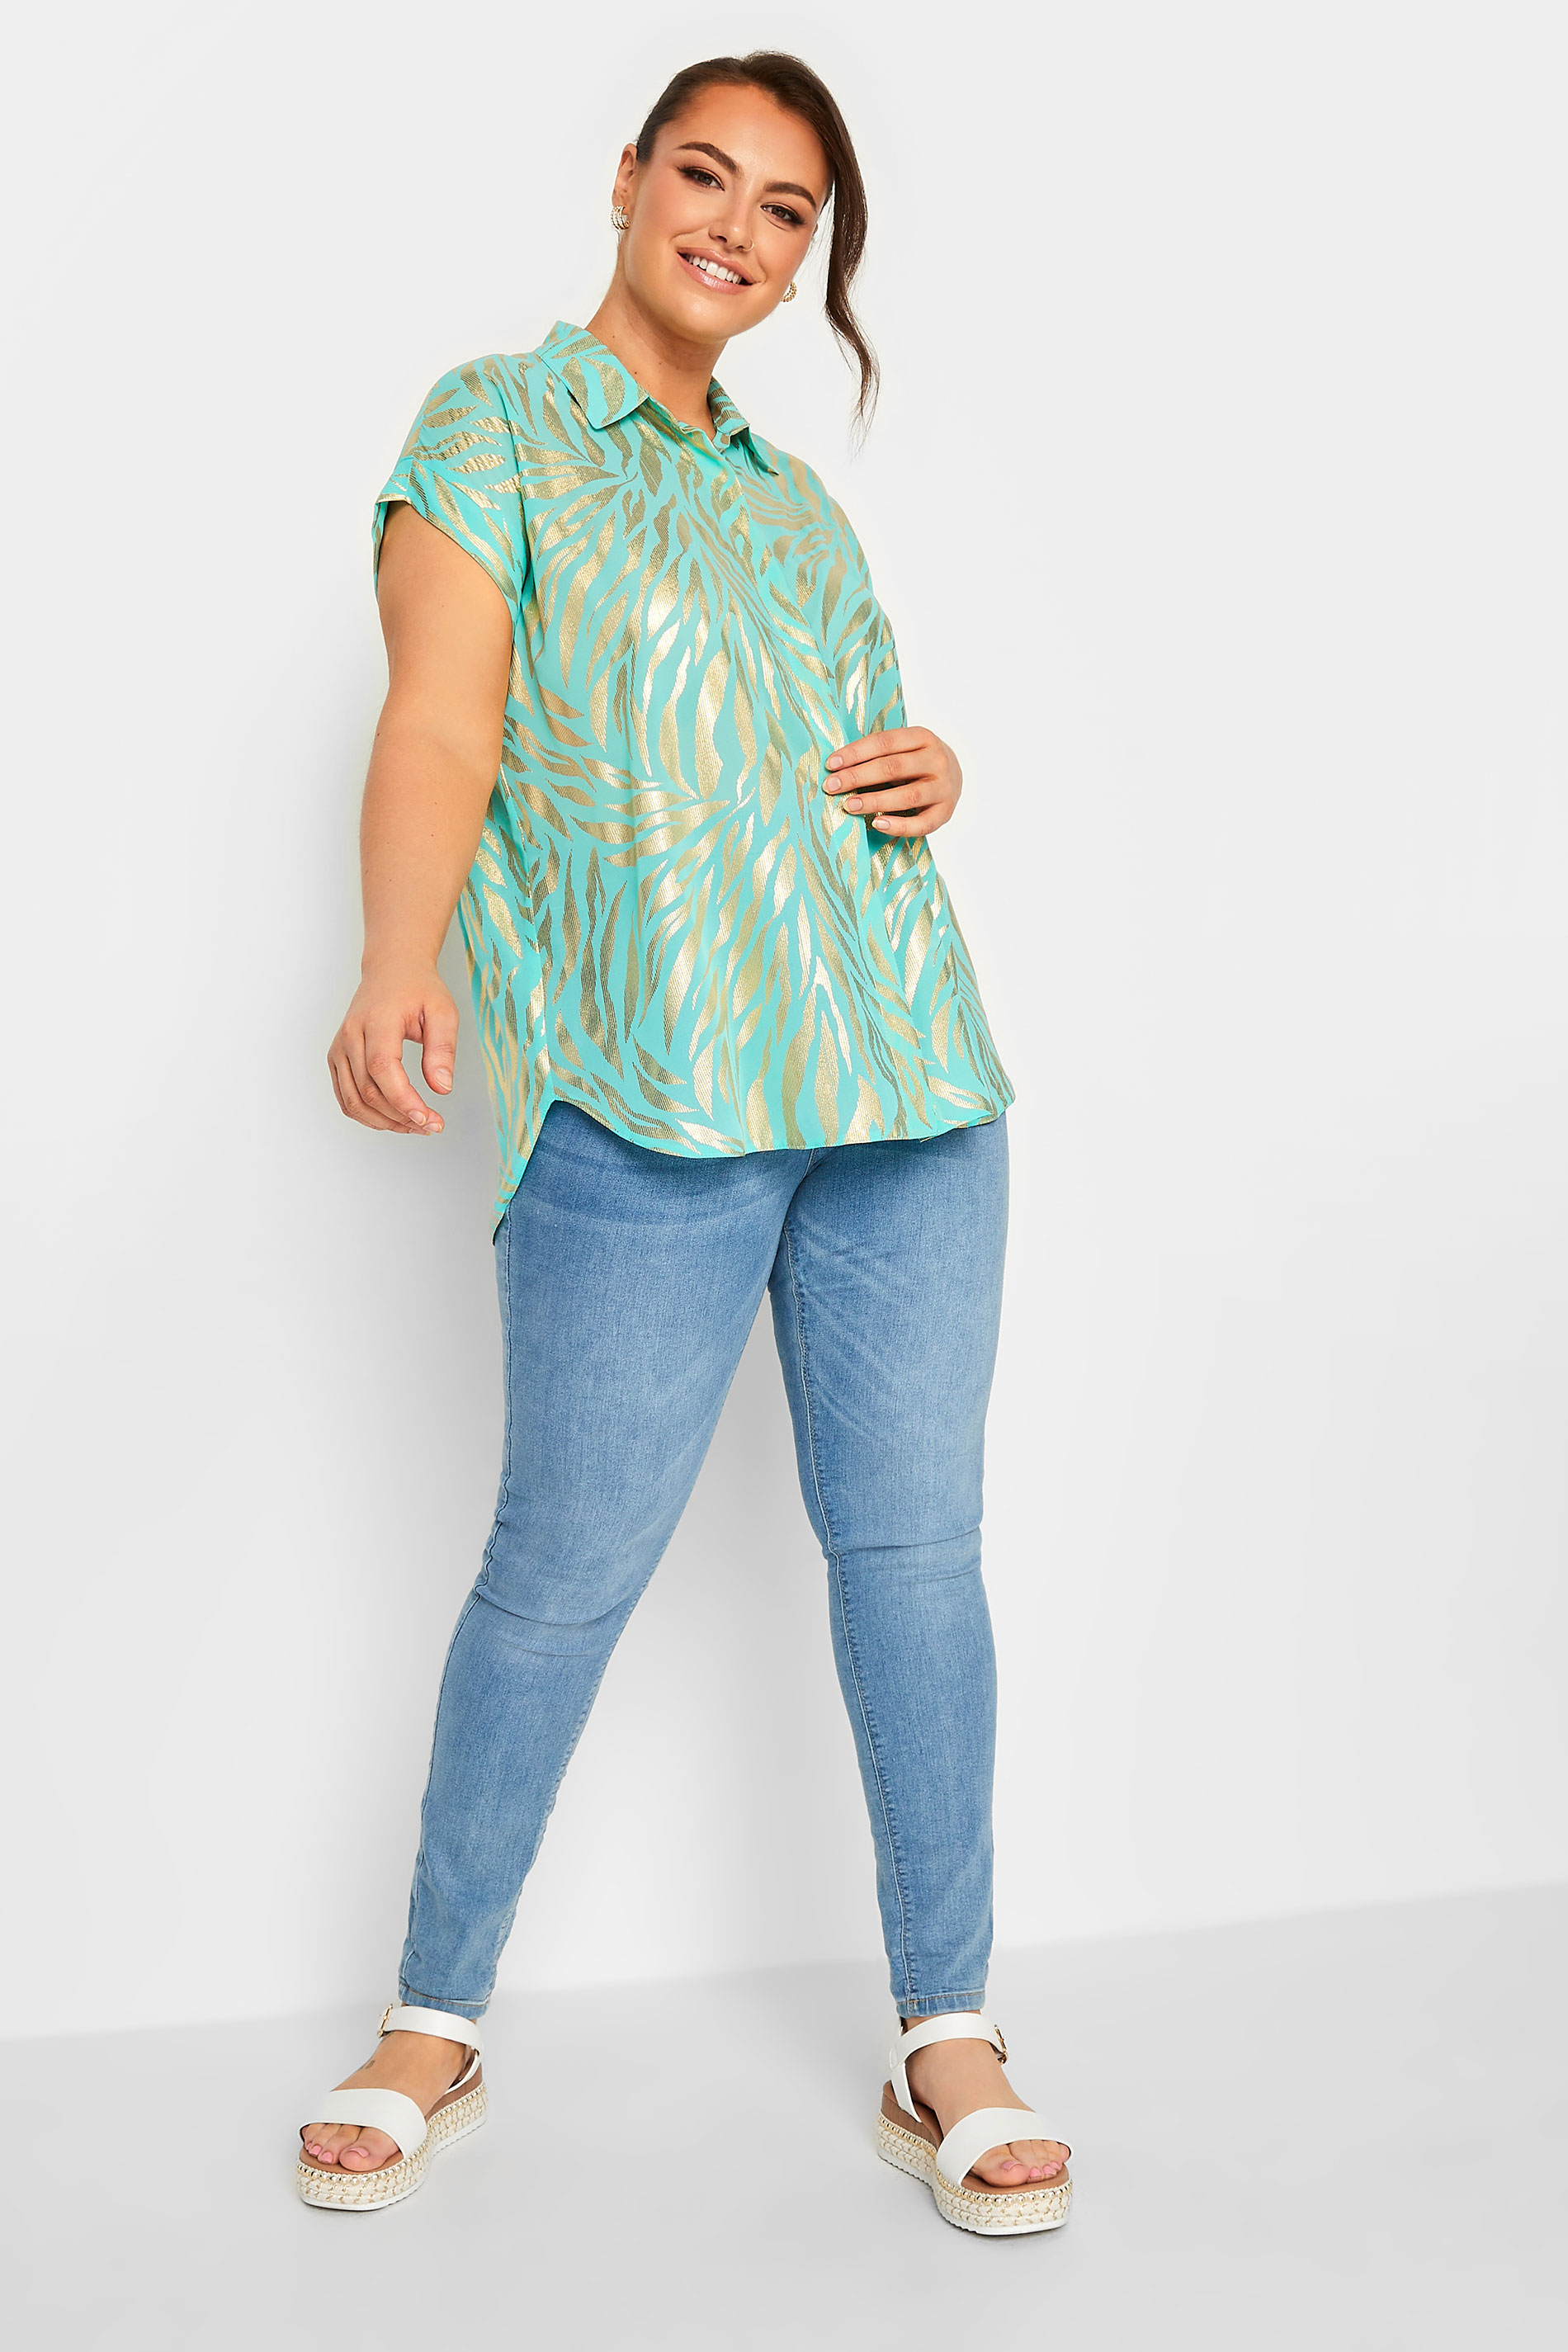 YOURS Curve Plus Size Mint Green & Gold Animal Print Shirt | Yours Clothing  2